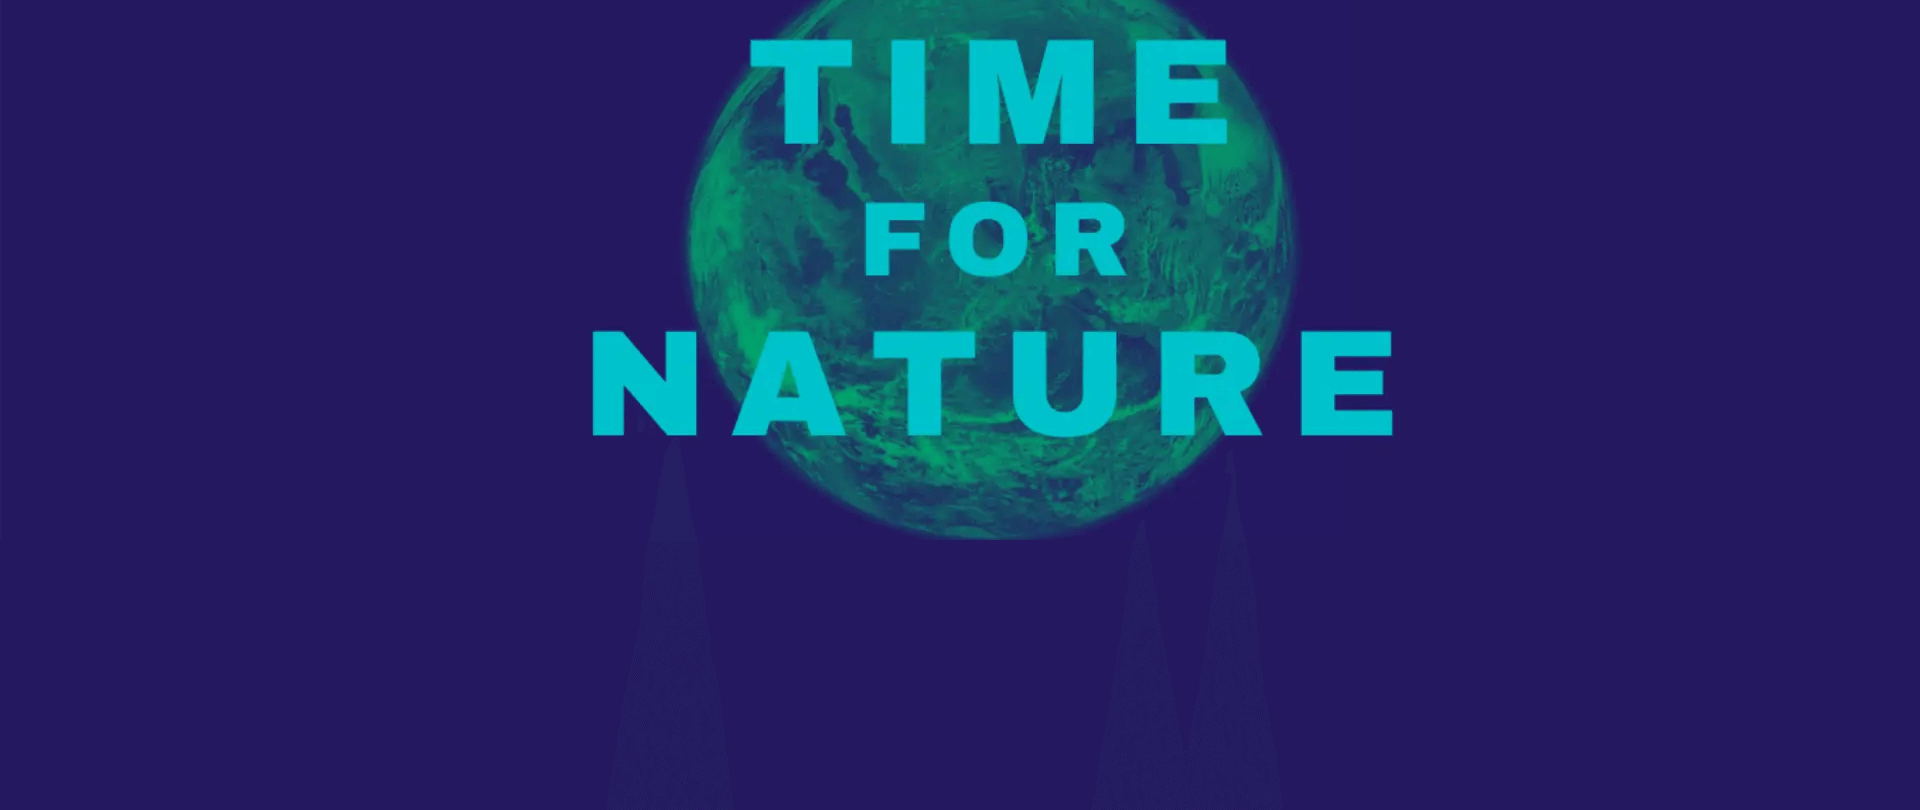 Time for nature